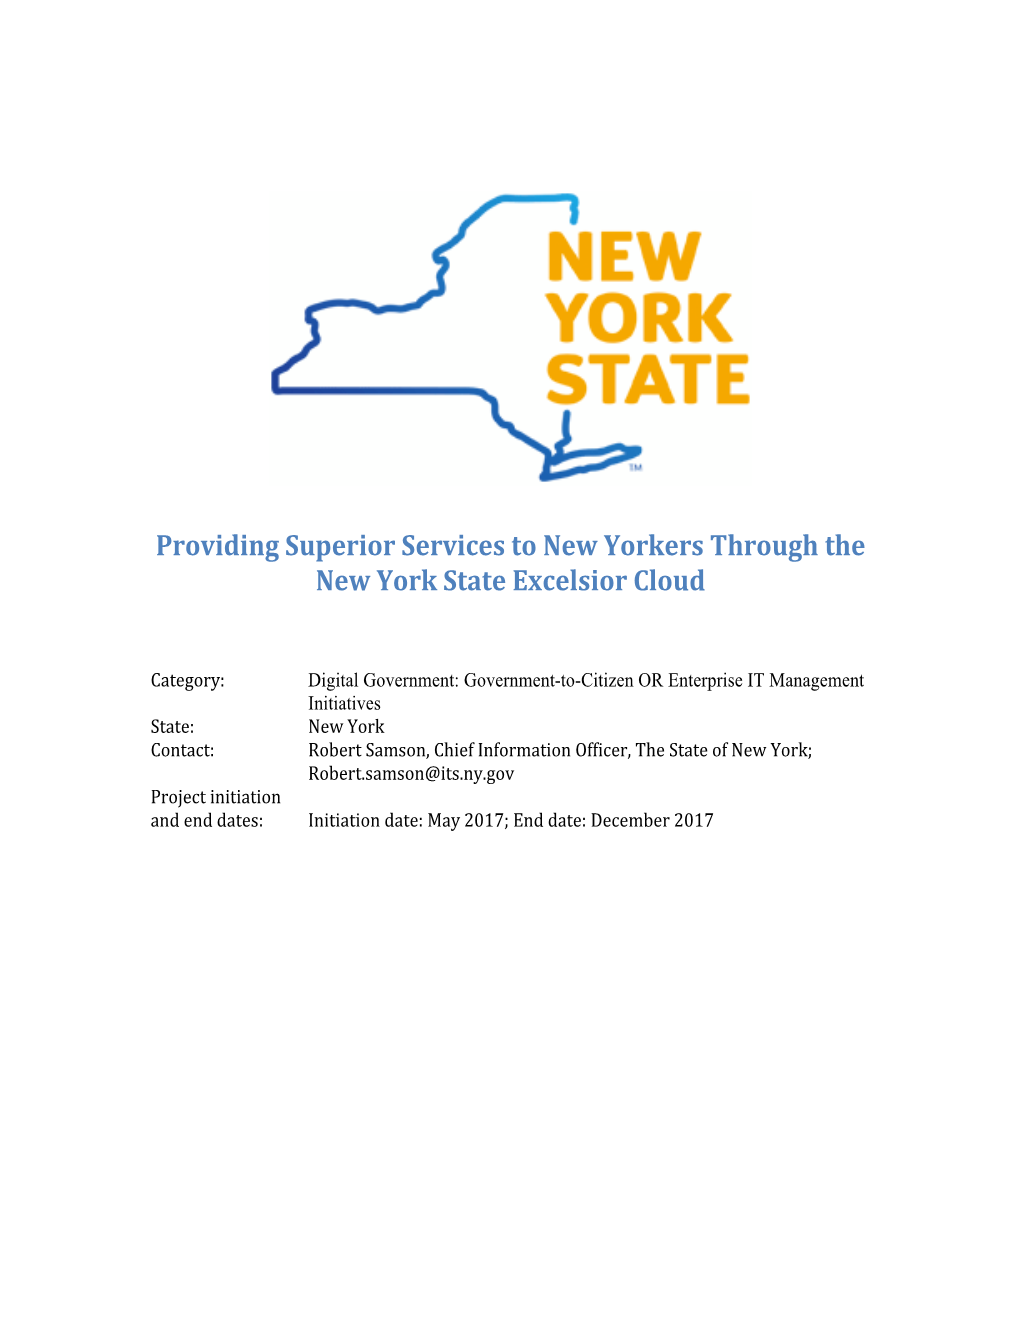 Providing Superior Services to New Yorkers Through the New York State Excelsior Cloud